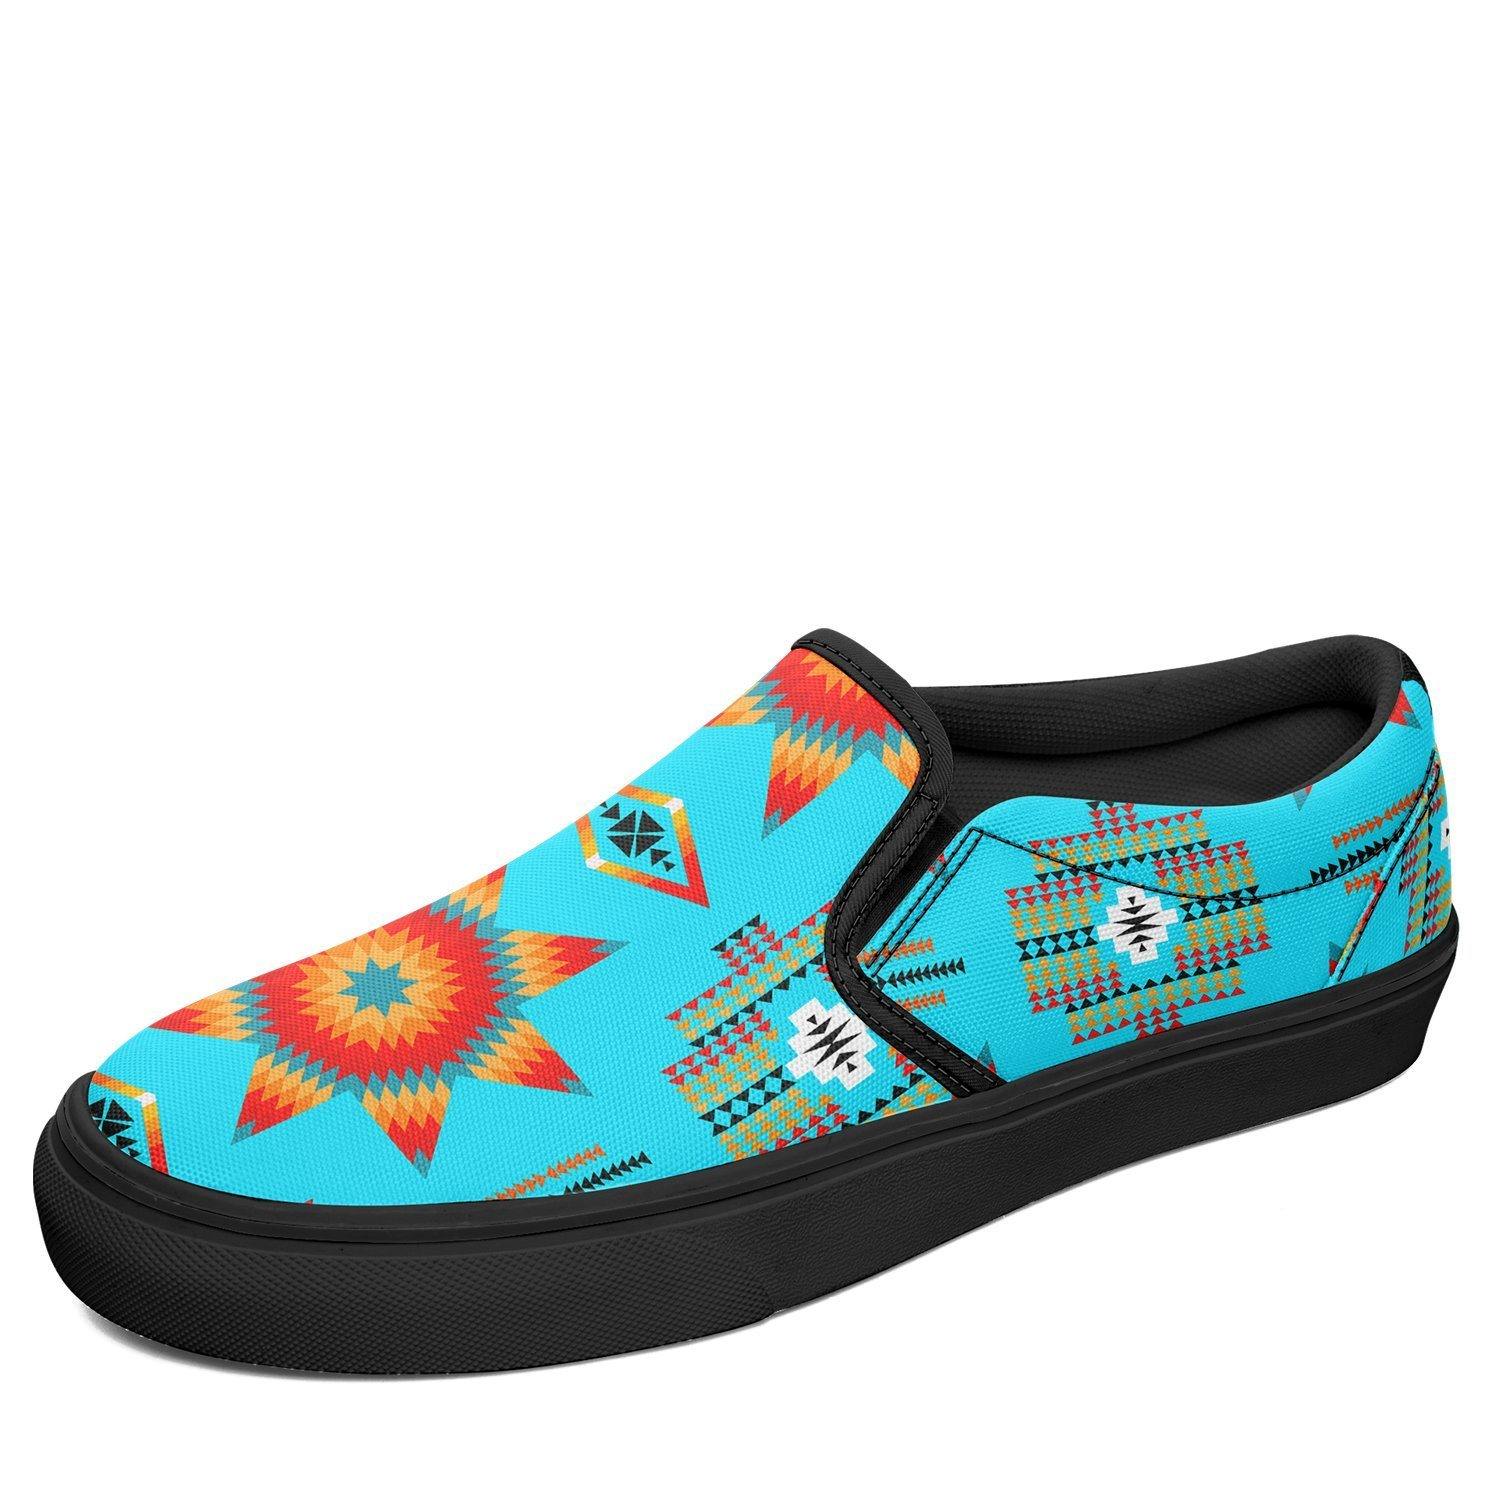 Rising Star Harvest Moon Otoyimm Kid's Canvas Slip On Shoes 49 Dzine US Youth 1 / EUR 32 Black Sole 